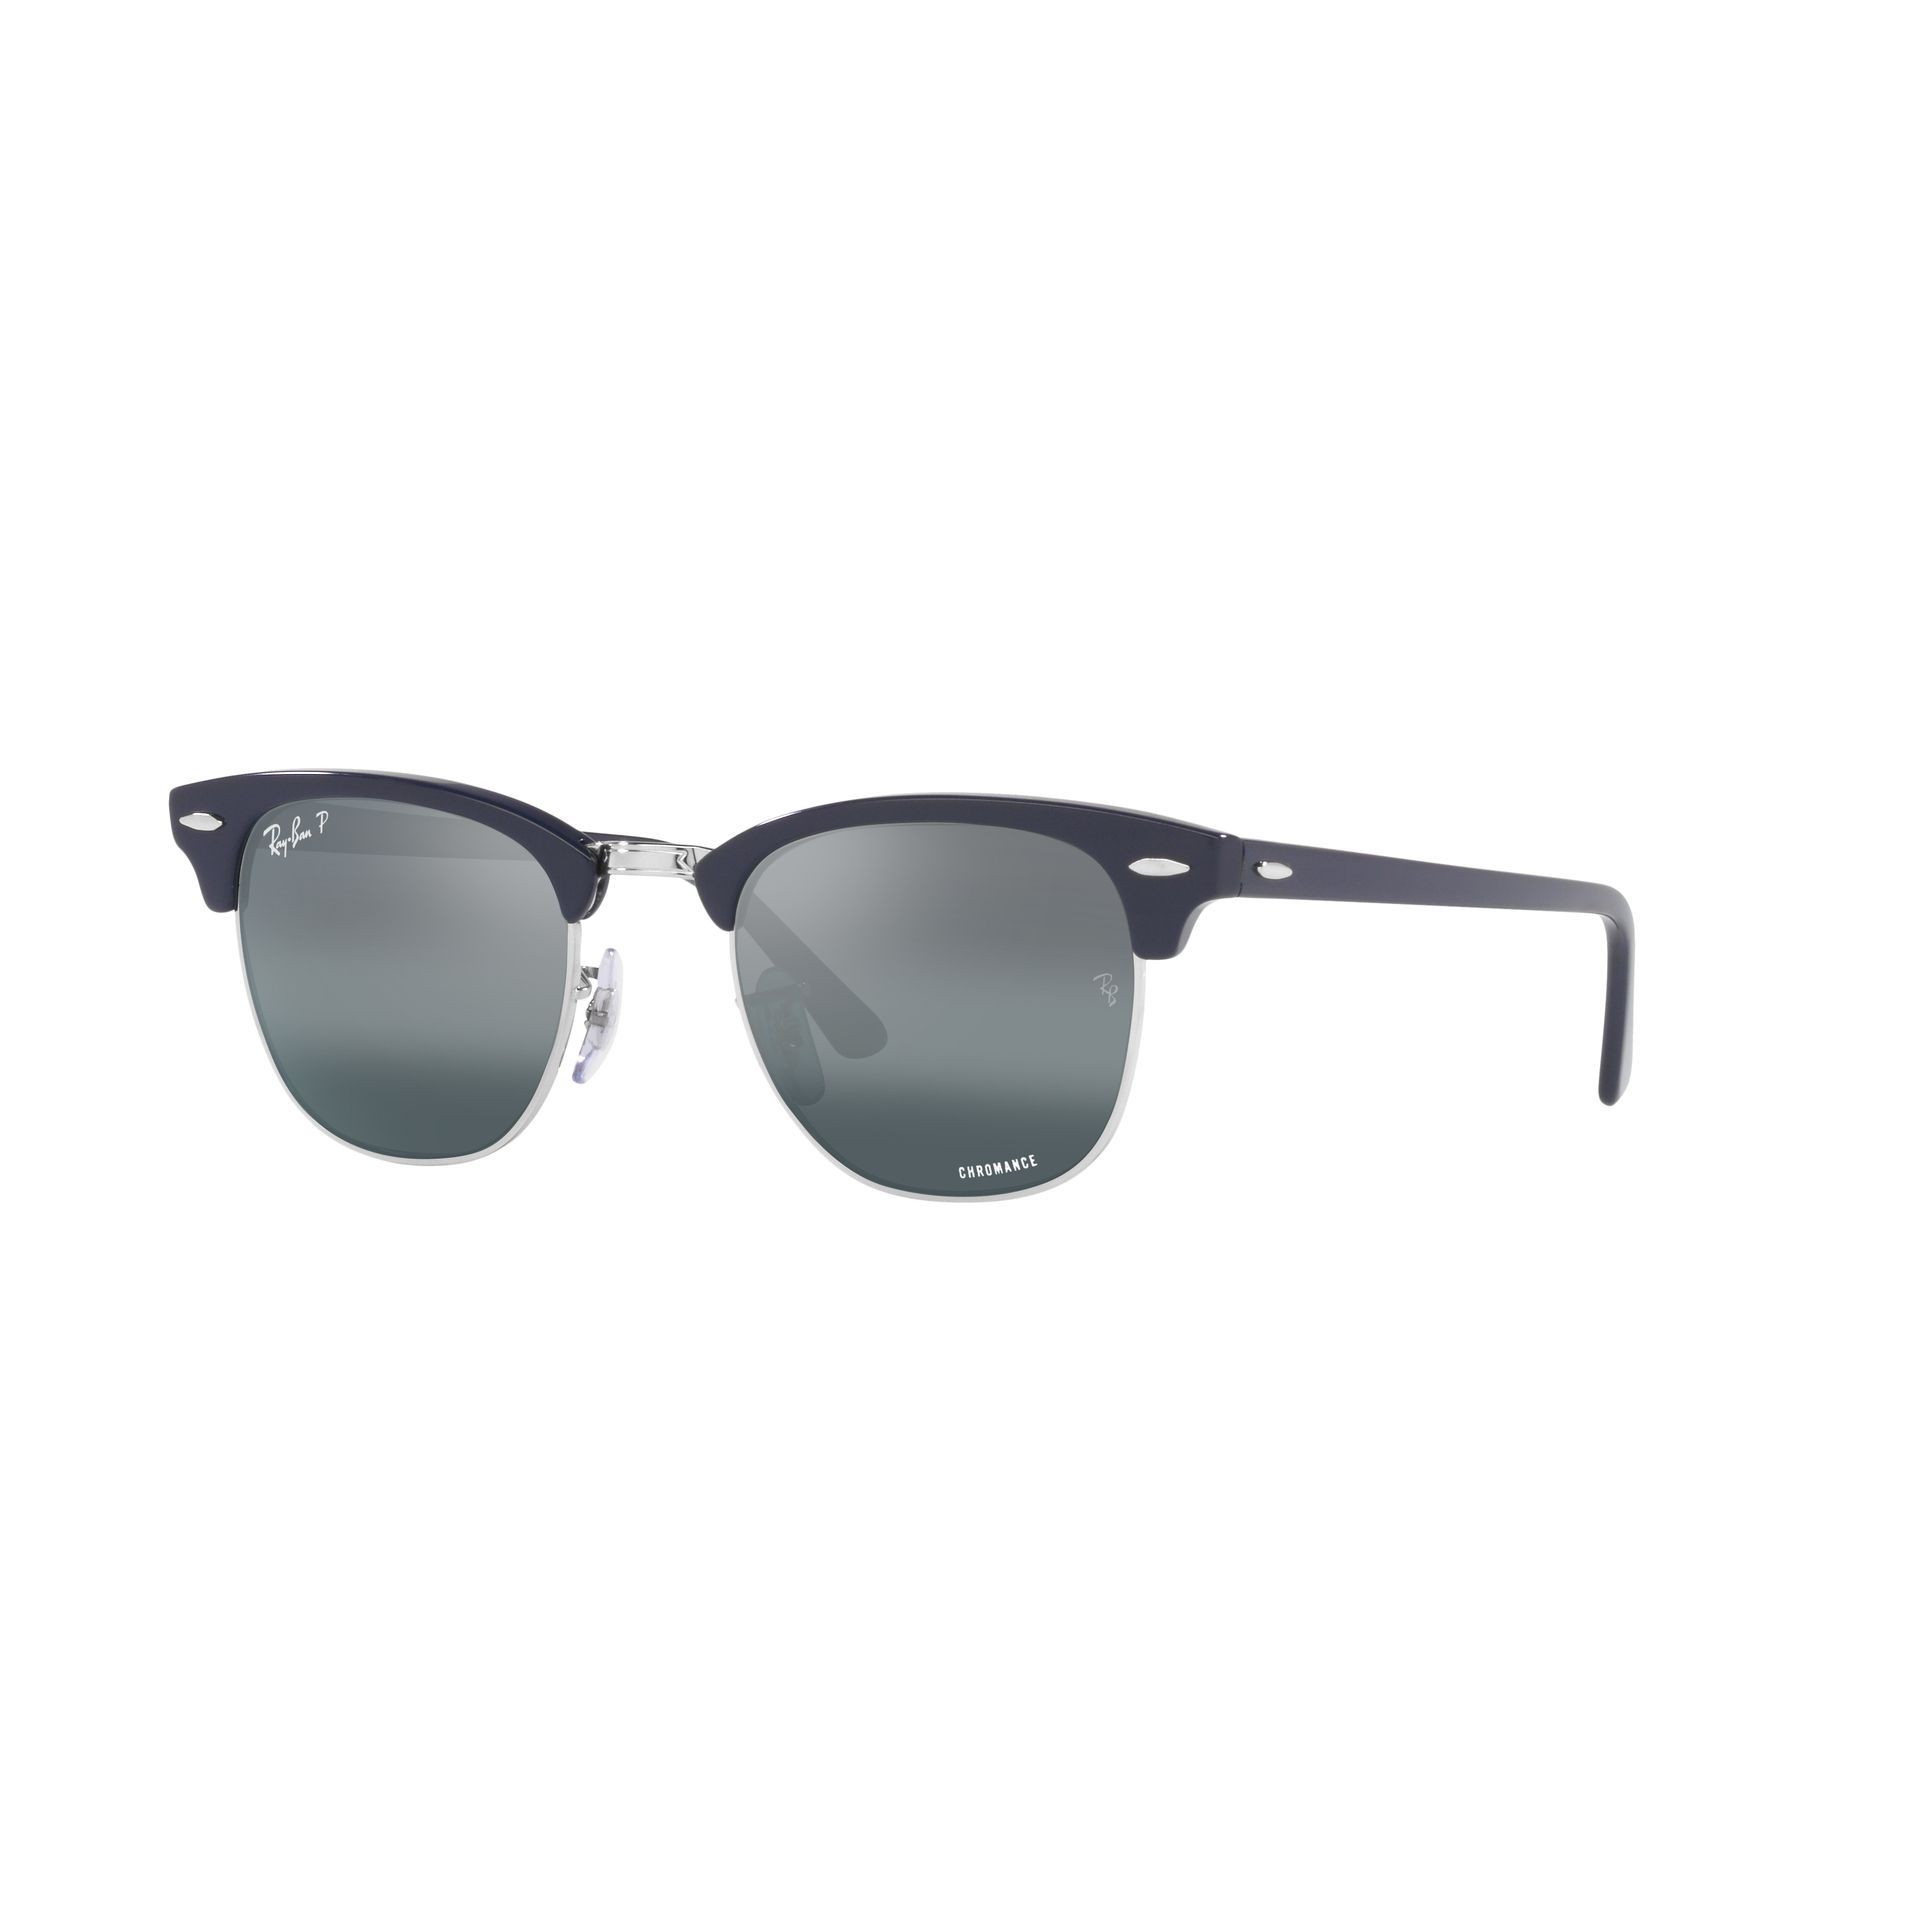 0RB3016 Clubmaster Sunglasses 1366G6 - size 51